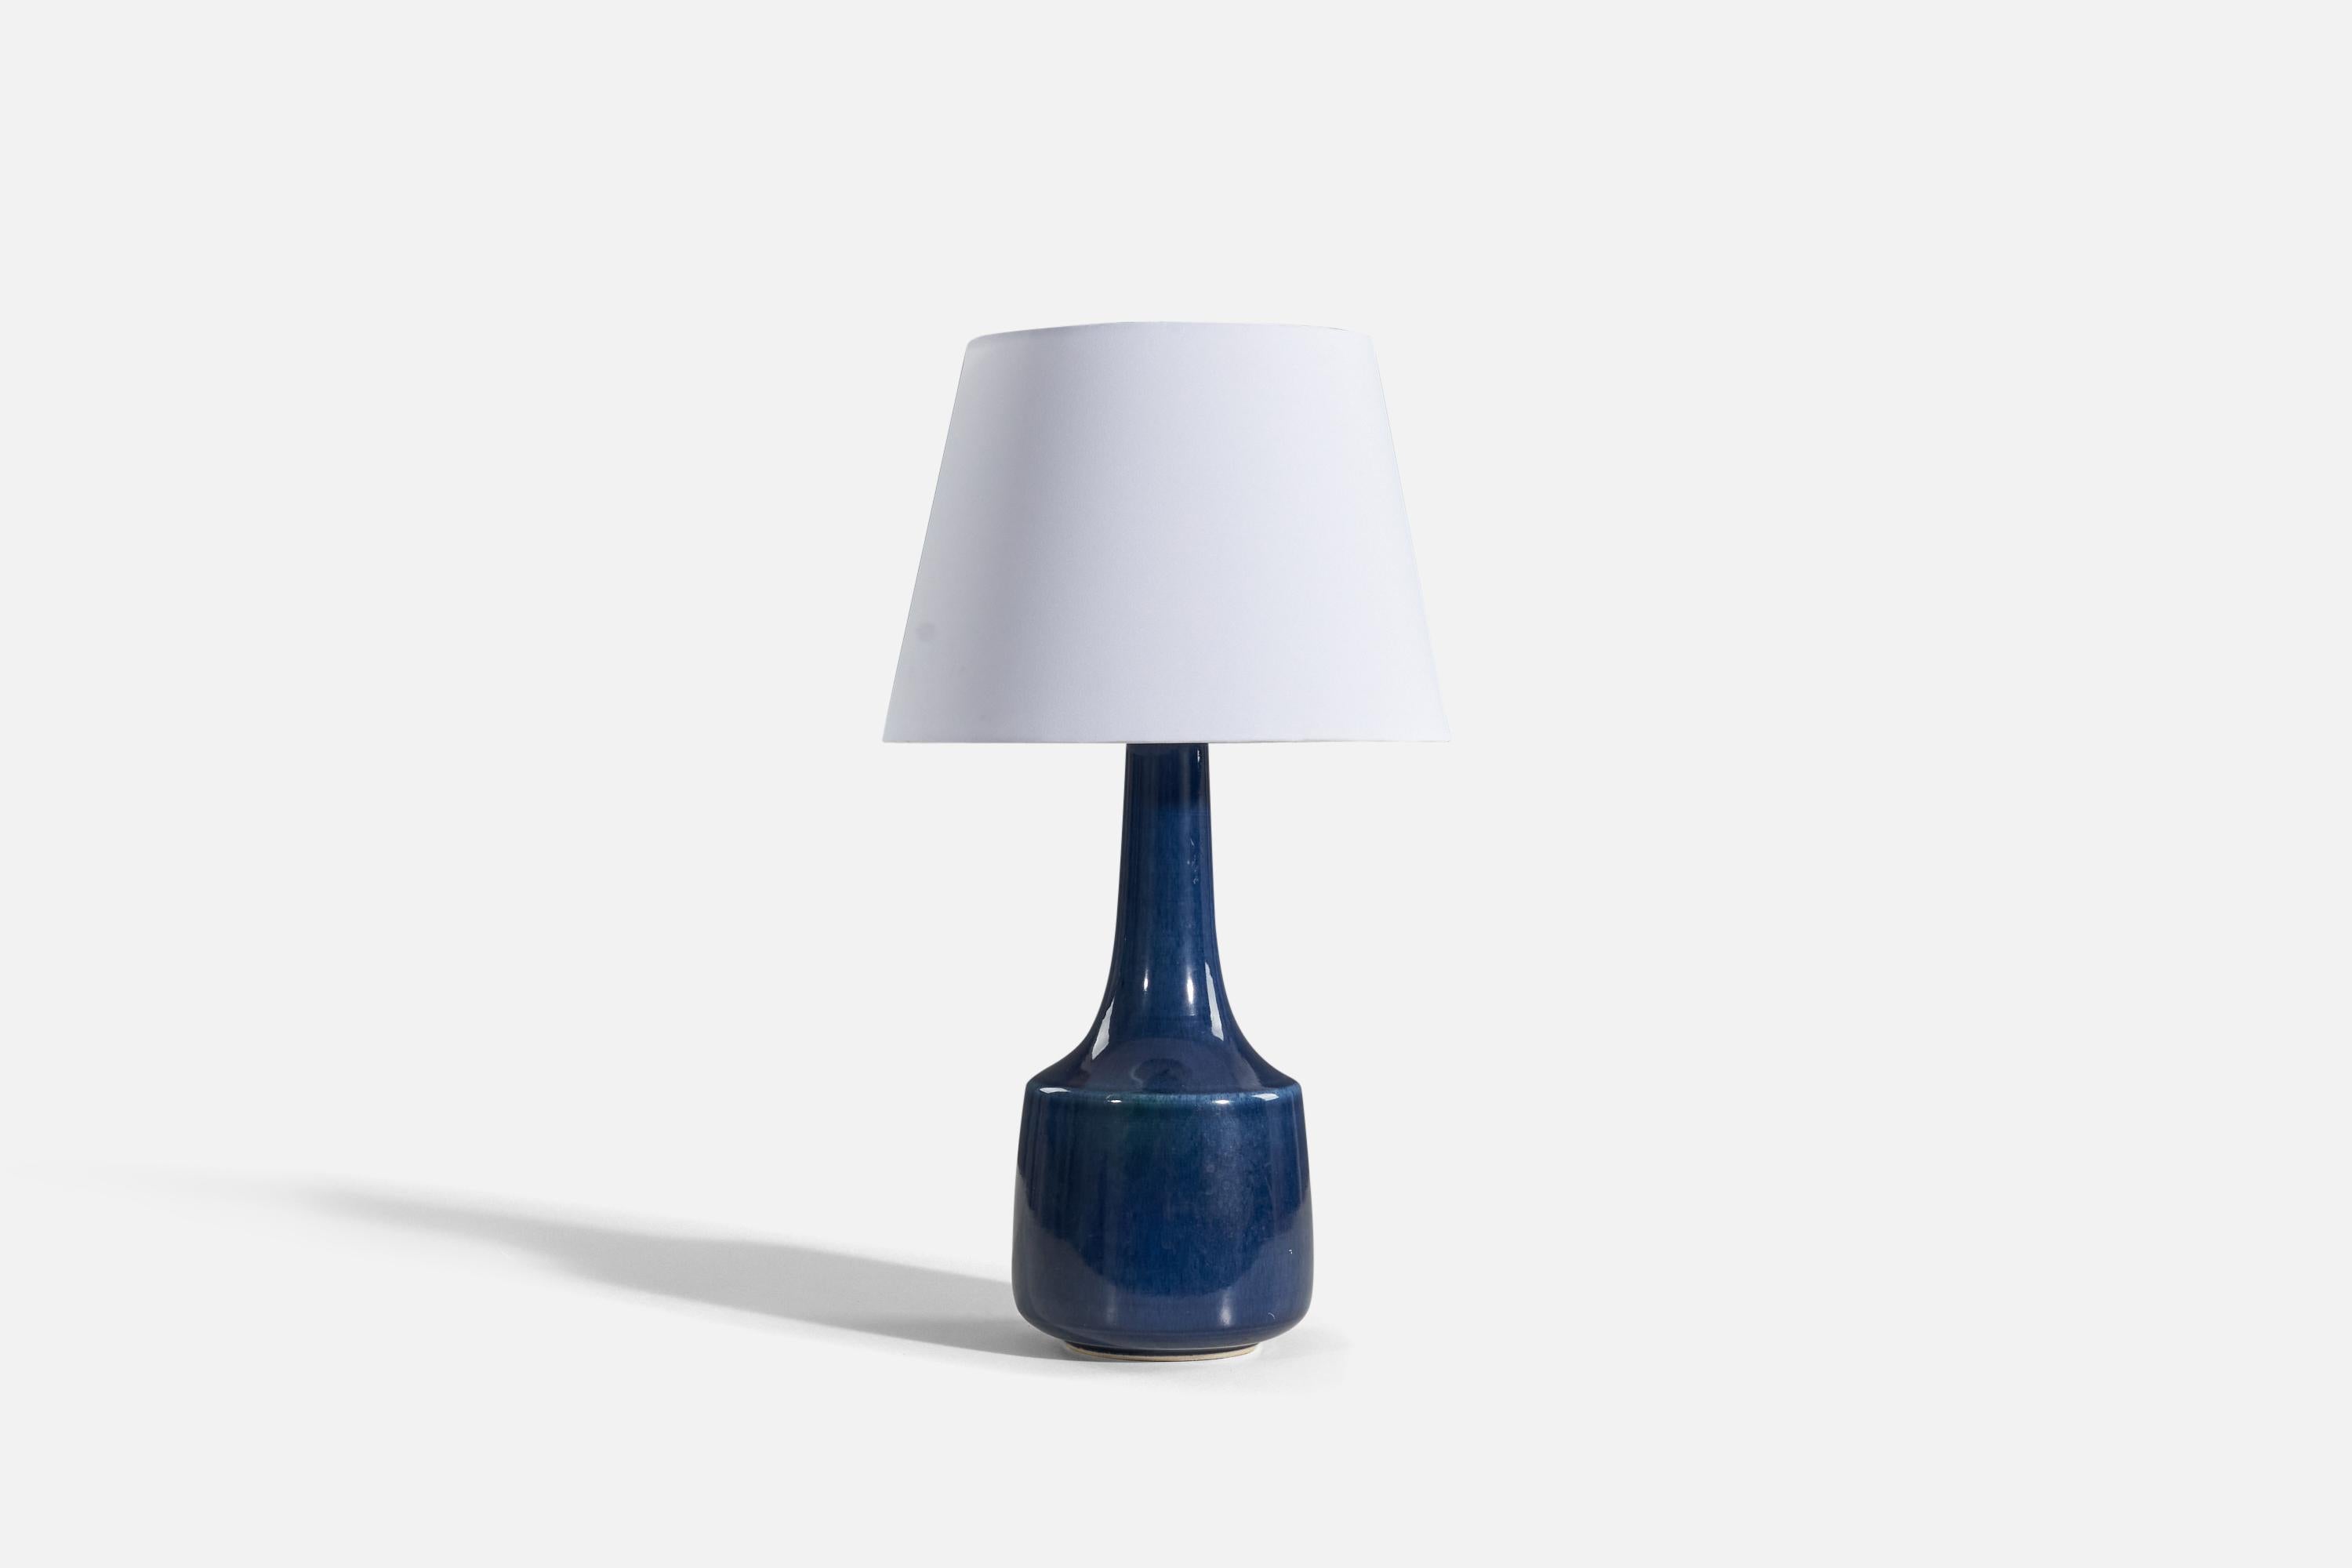 A blue ceramic and brass table lamp designed and produced by Lotte and Gunnar Bostrom, Canada, 1960s.

Sold without lampshade. 

Dimensions of lamp (inches) : 21.375 x 7 x 7 (H x W x D).
Dimensions shade (inches) : 10.25 x 14 x 10.25 (T x B x